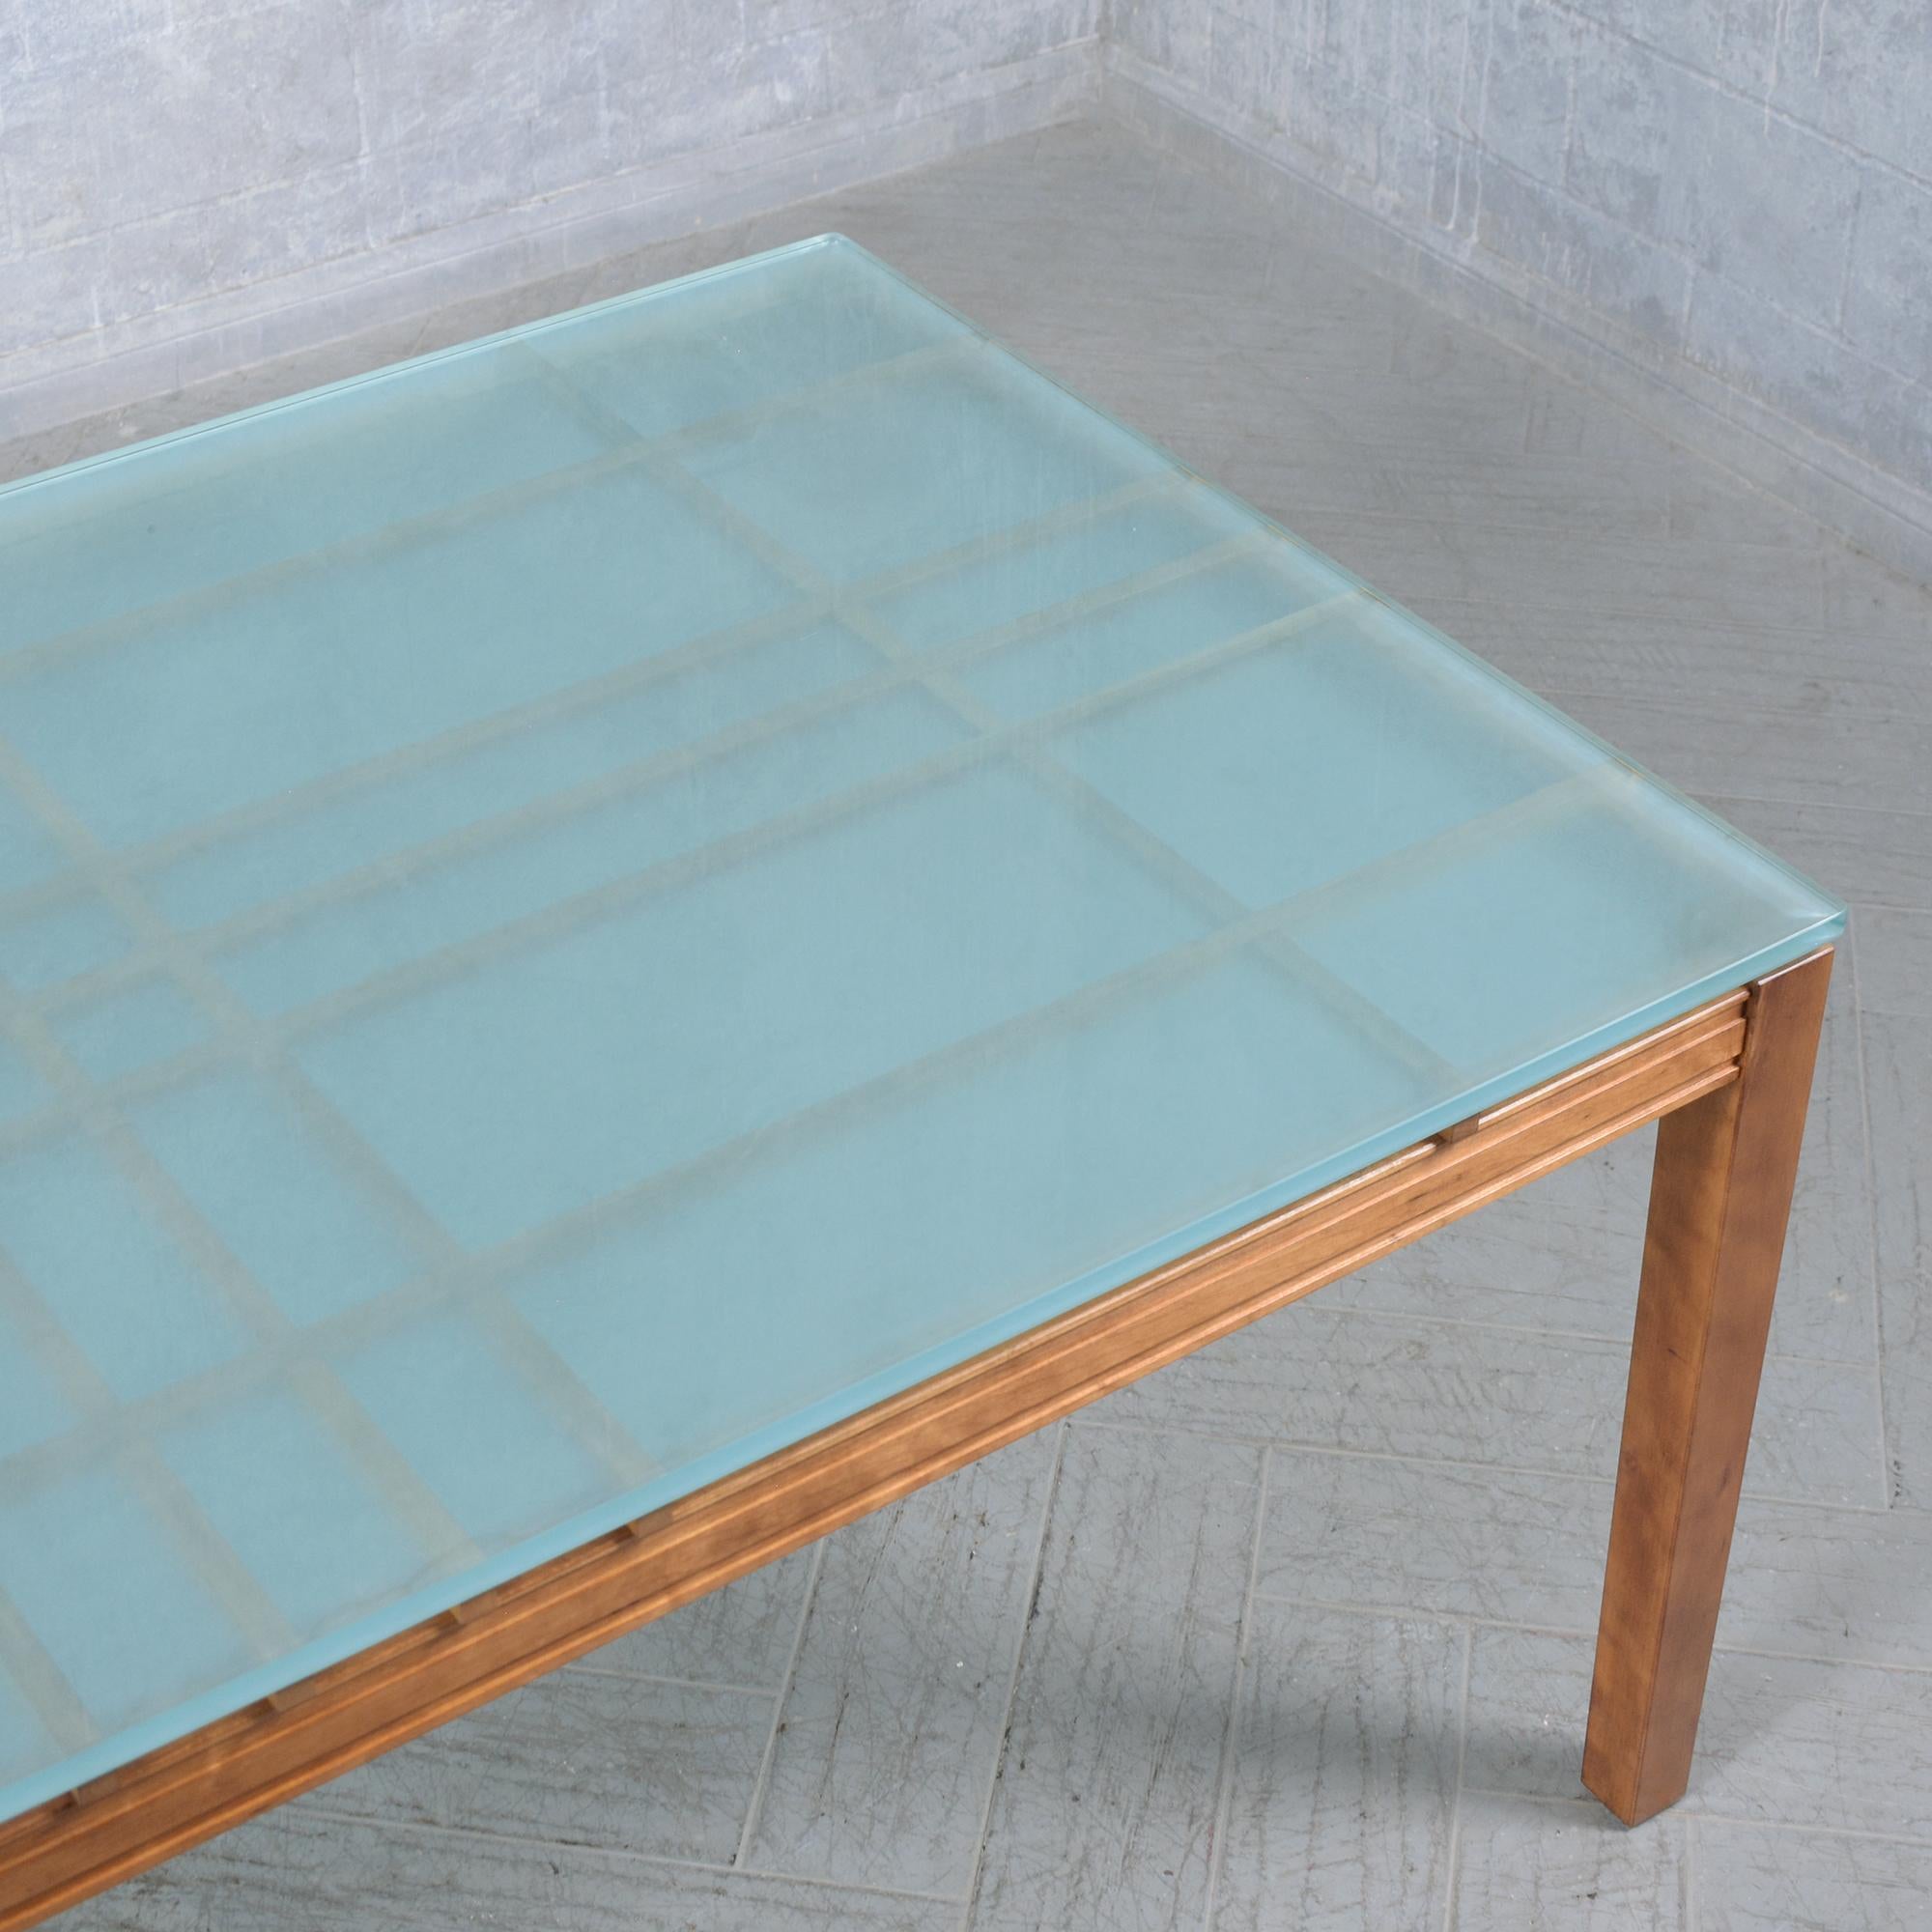 1980s Modern Maple Wood Dining Table with Frosted Glass Top For Sale 1